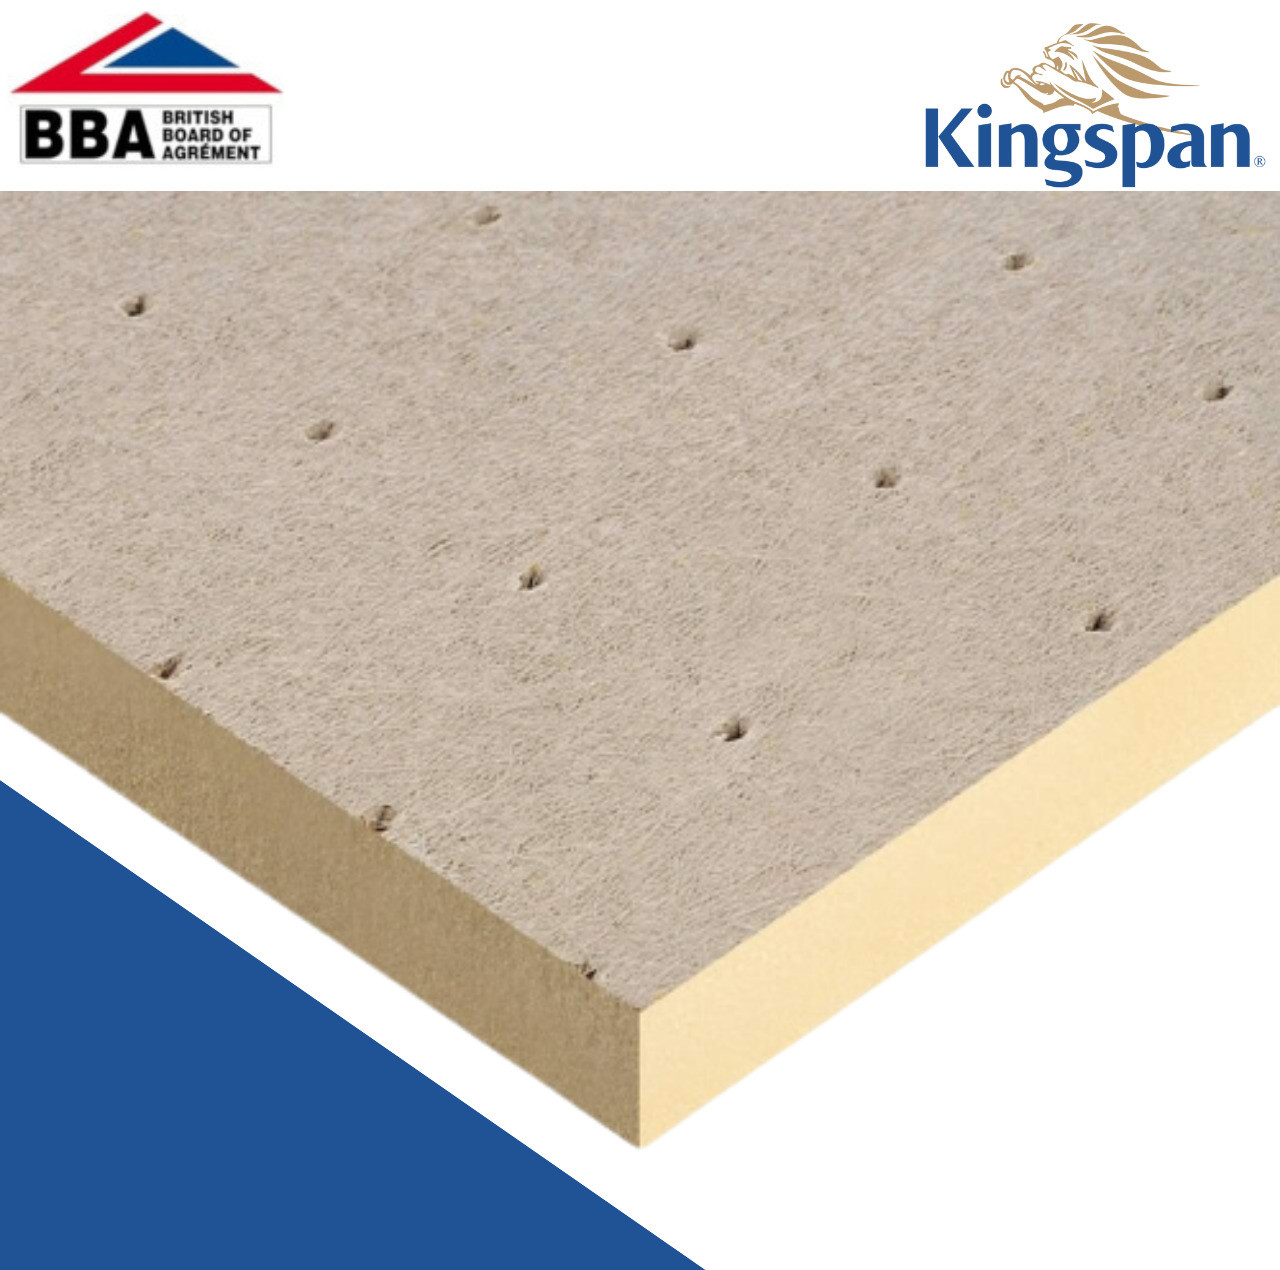 130mm  - Kingspan Thermaroof TR27 PIR Flat Roof Insulation Board 1200 X 600 X 130mm - Pack of 6 Sheets  TR27/130 KGS-51312